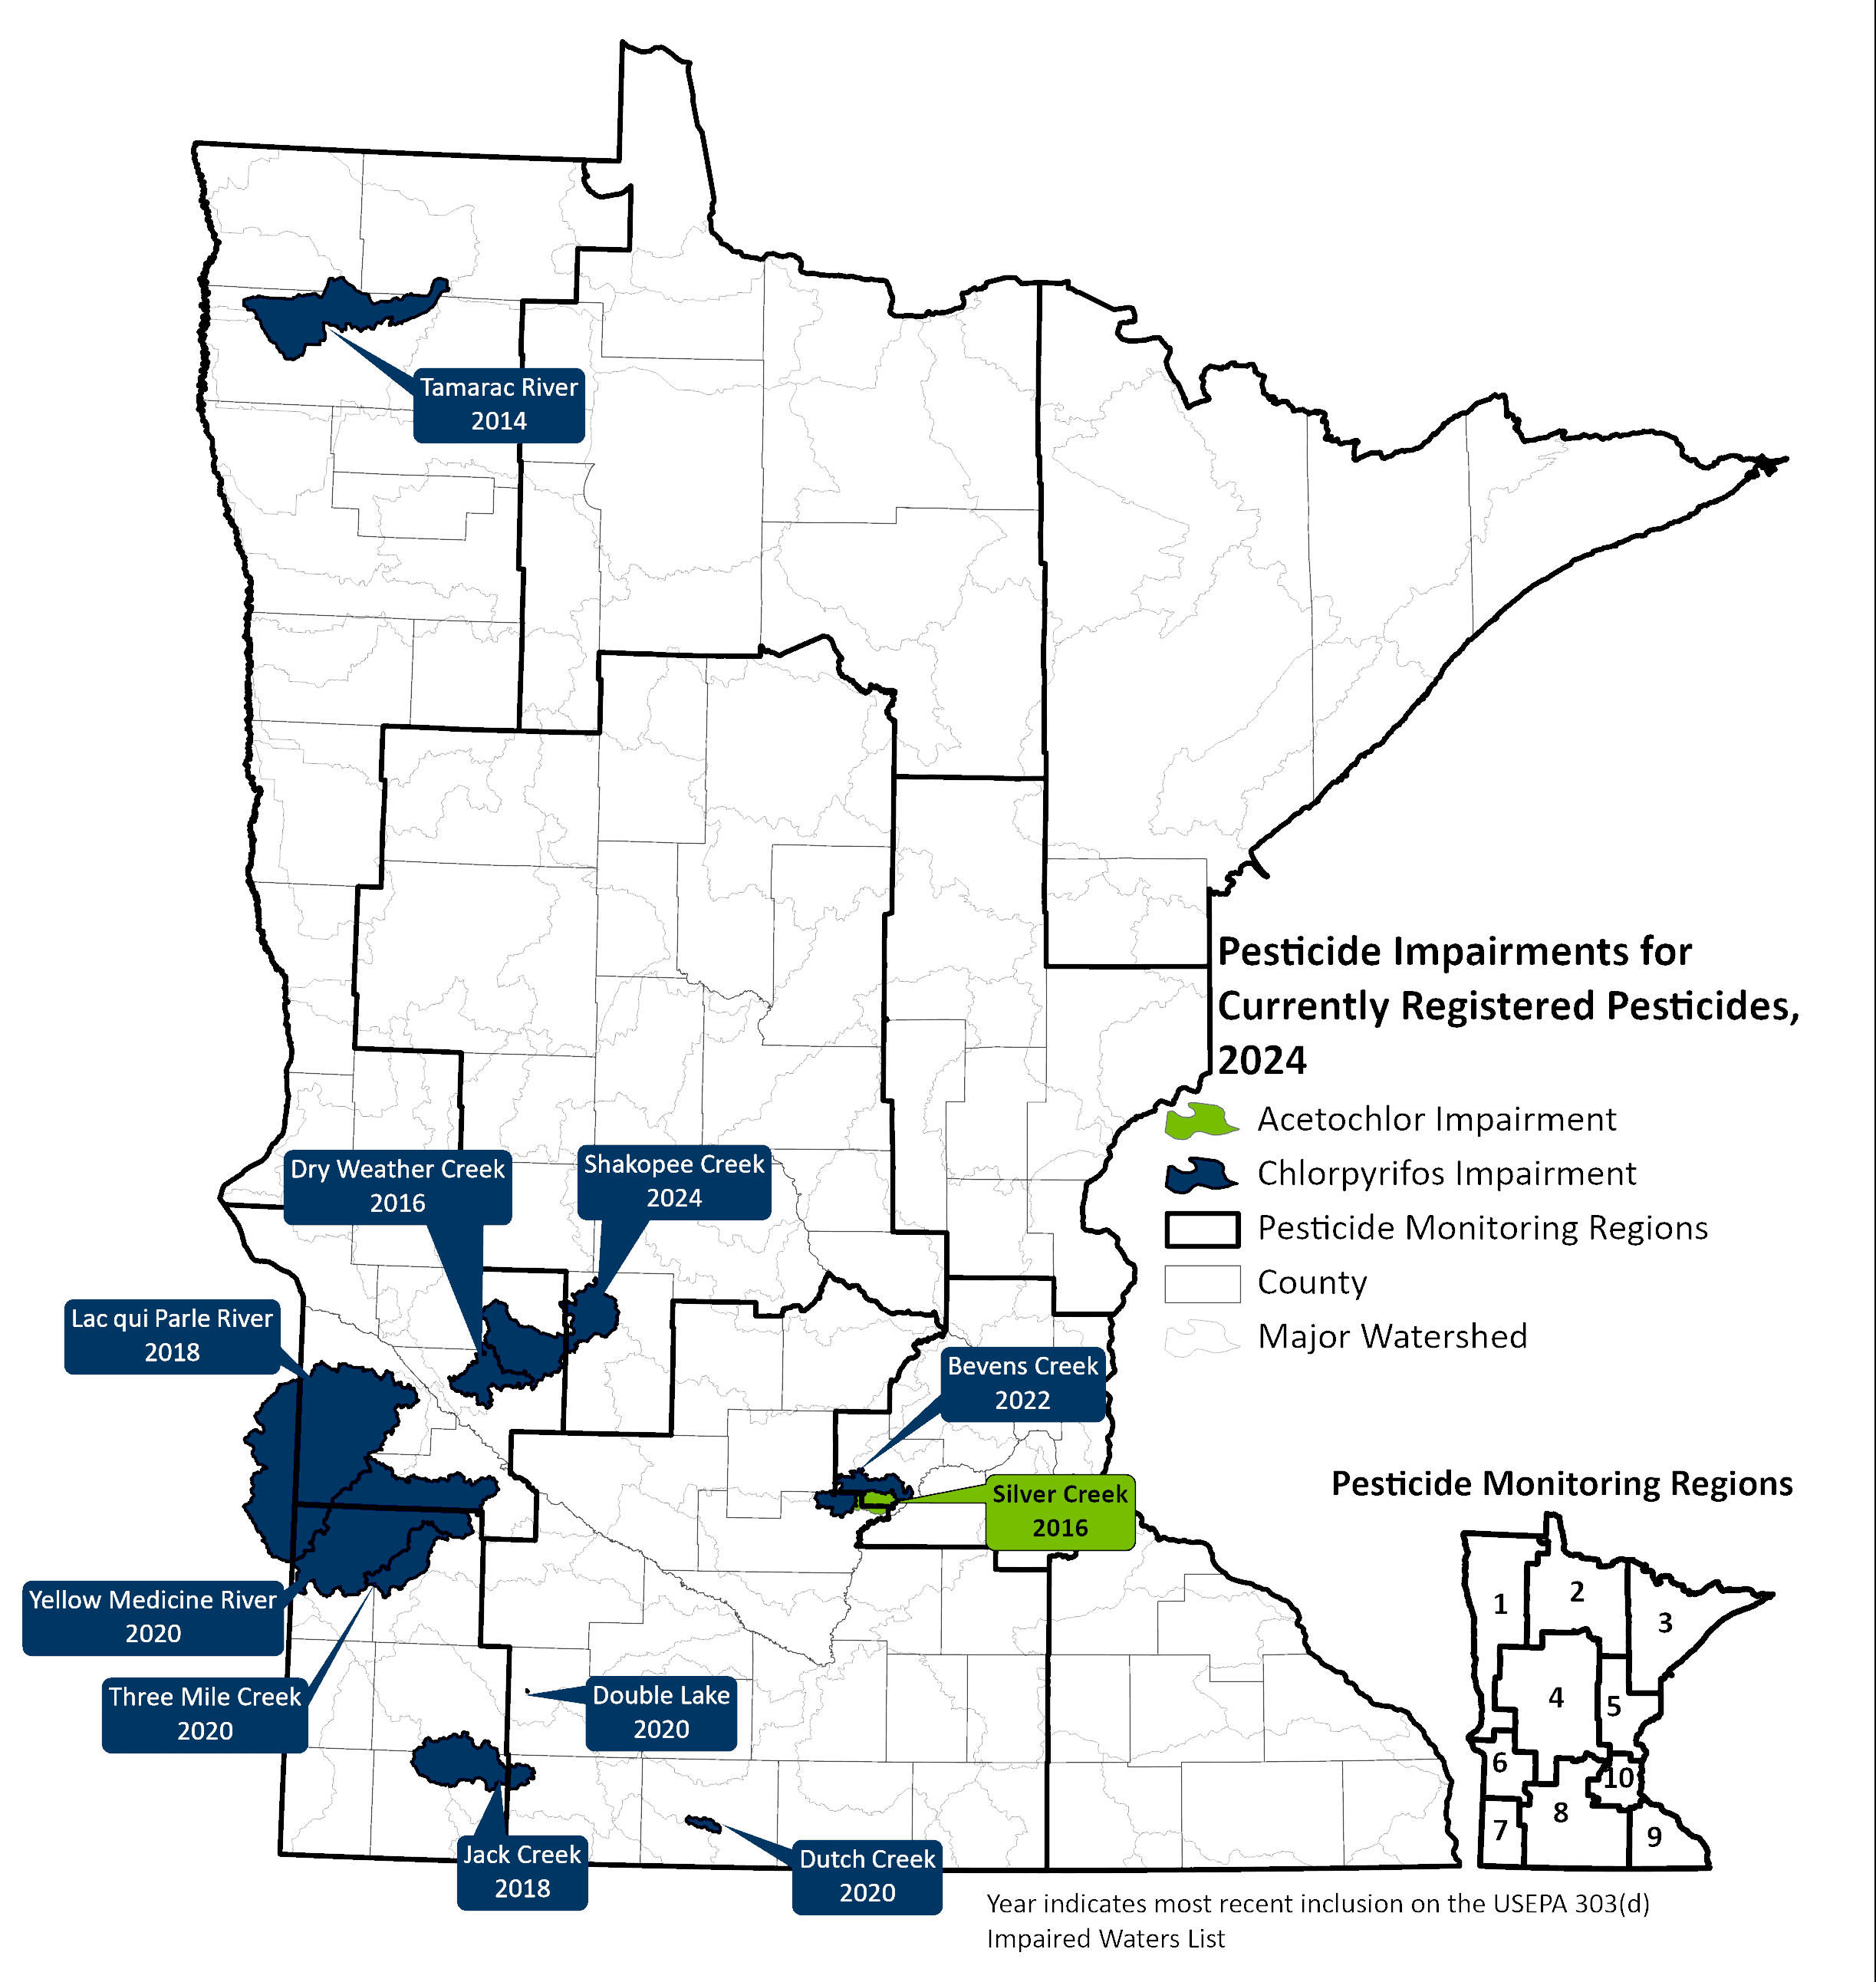 Map of Minnesota illustrating the waterbodies that are designated as impaired or proposed to be designated by the MPCA. Six are located in the southwest, four in south central, and 1 in the northwest. See the table for more information.